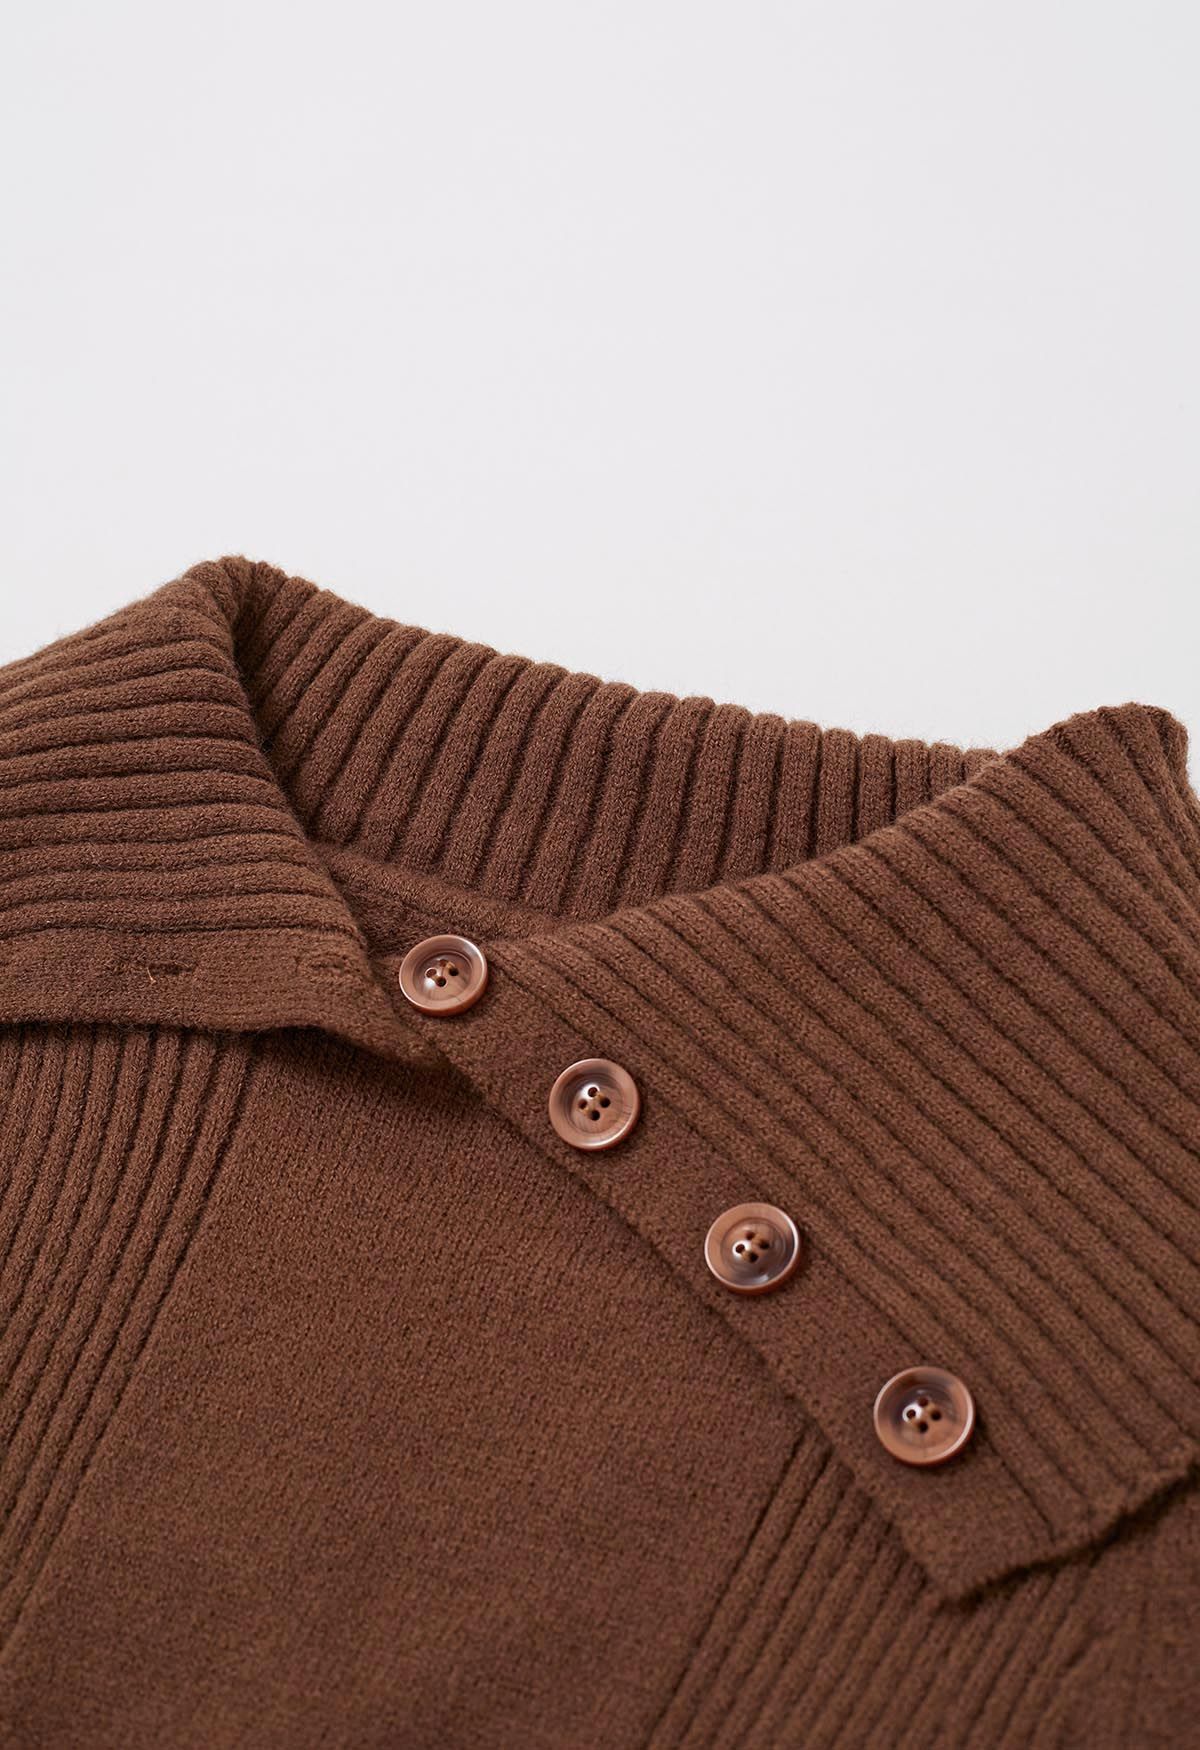 Flap Buttoned Collar Knit Crop Top in Brown